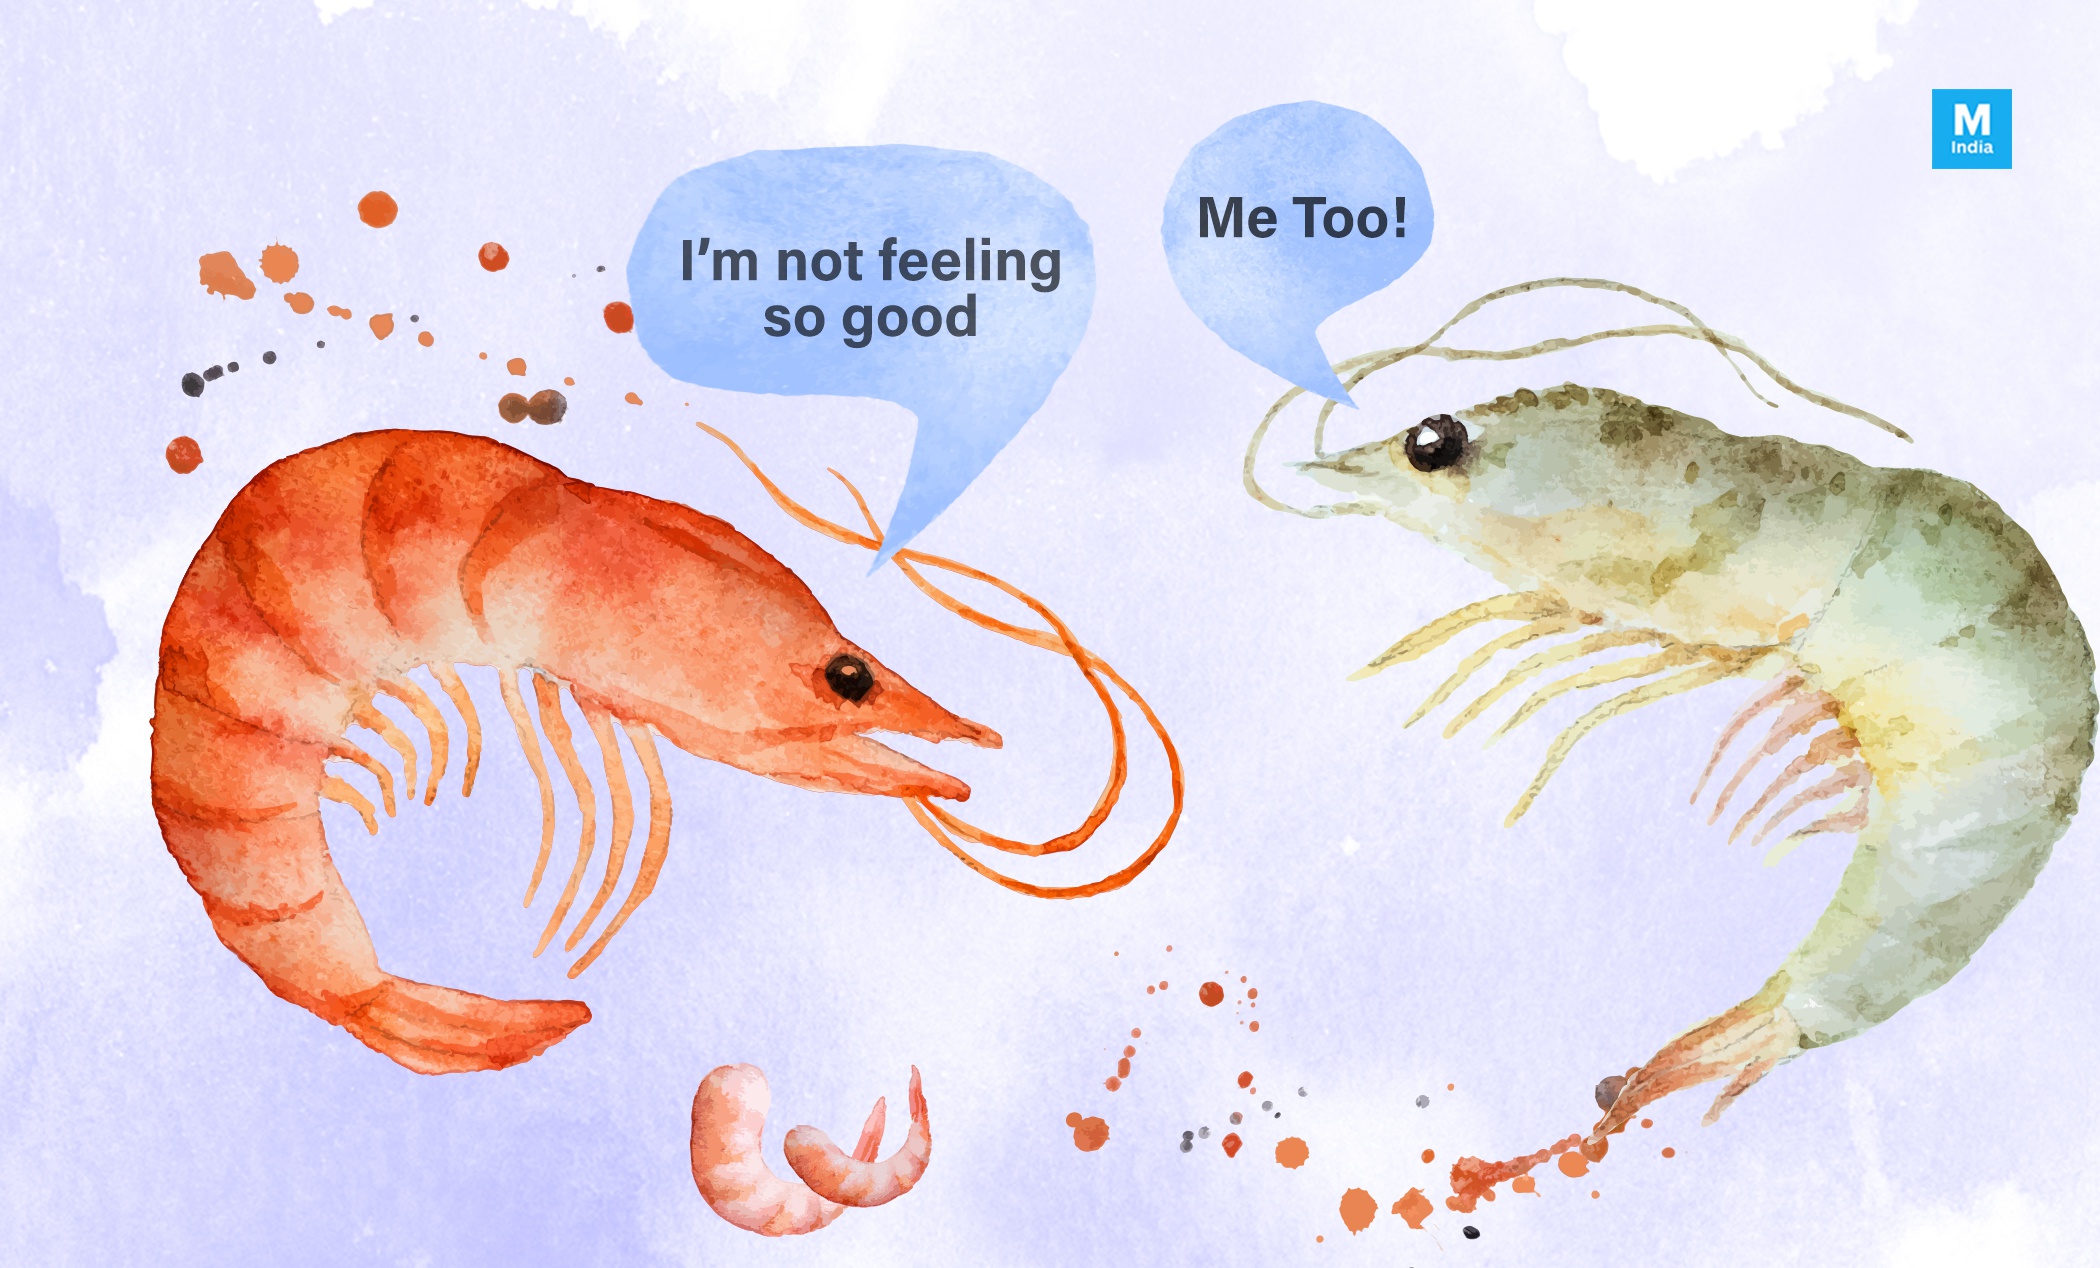 What are the side effects of eating shrimp?